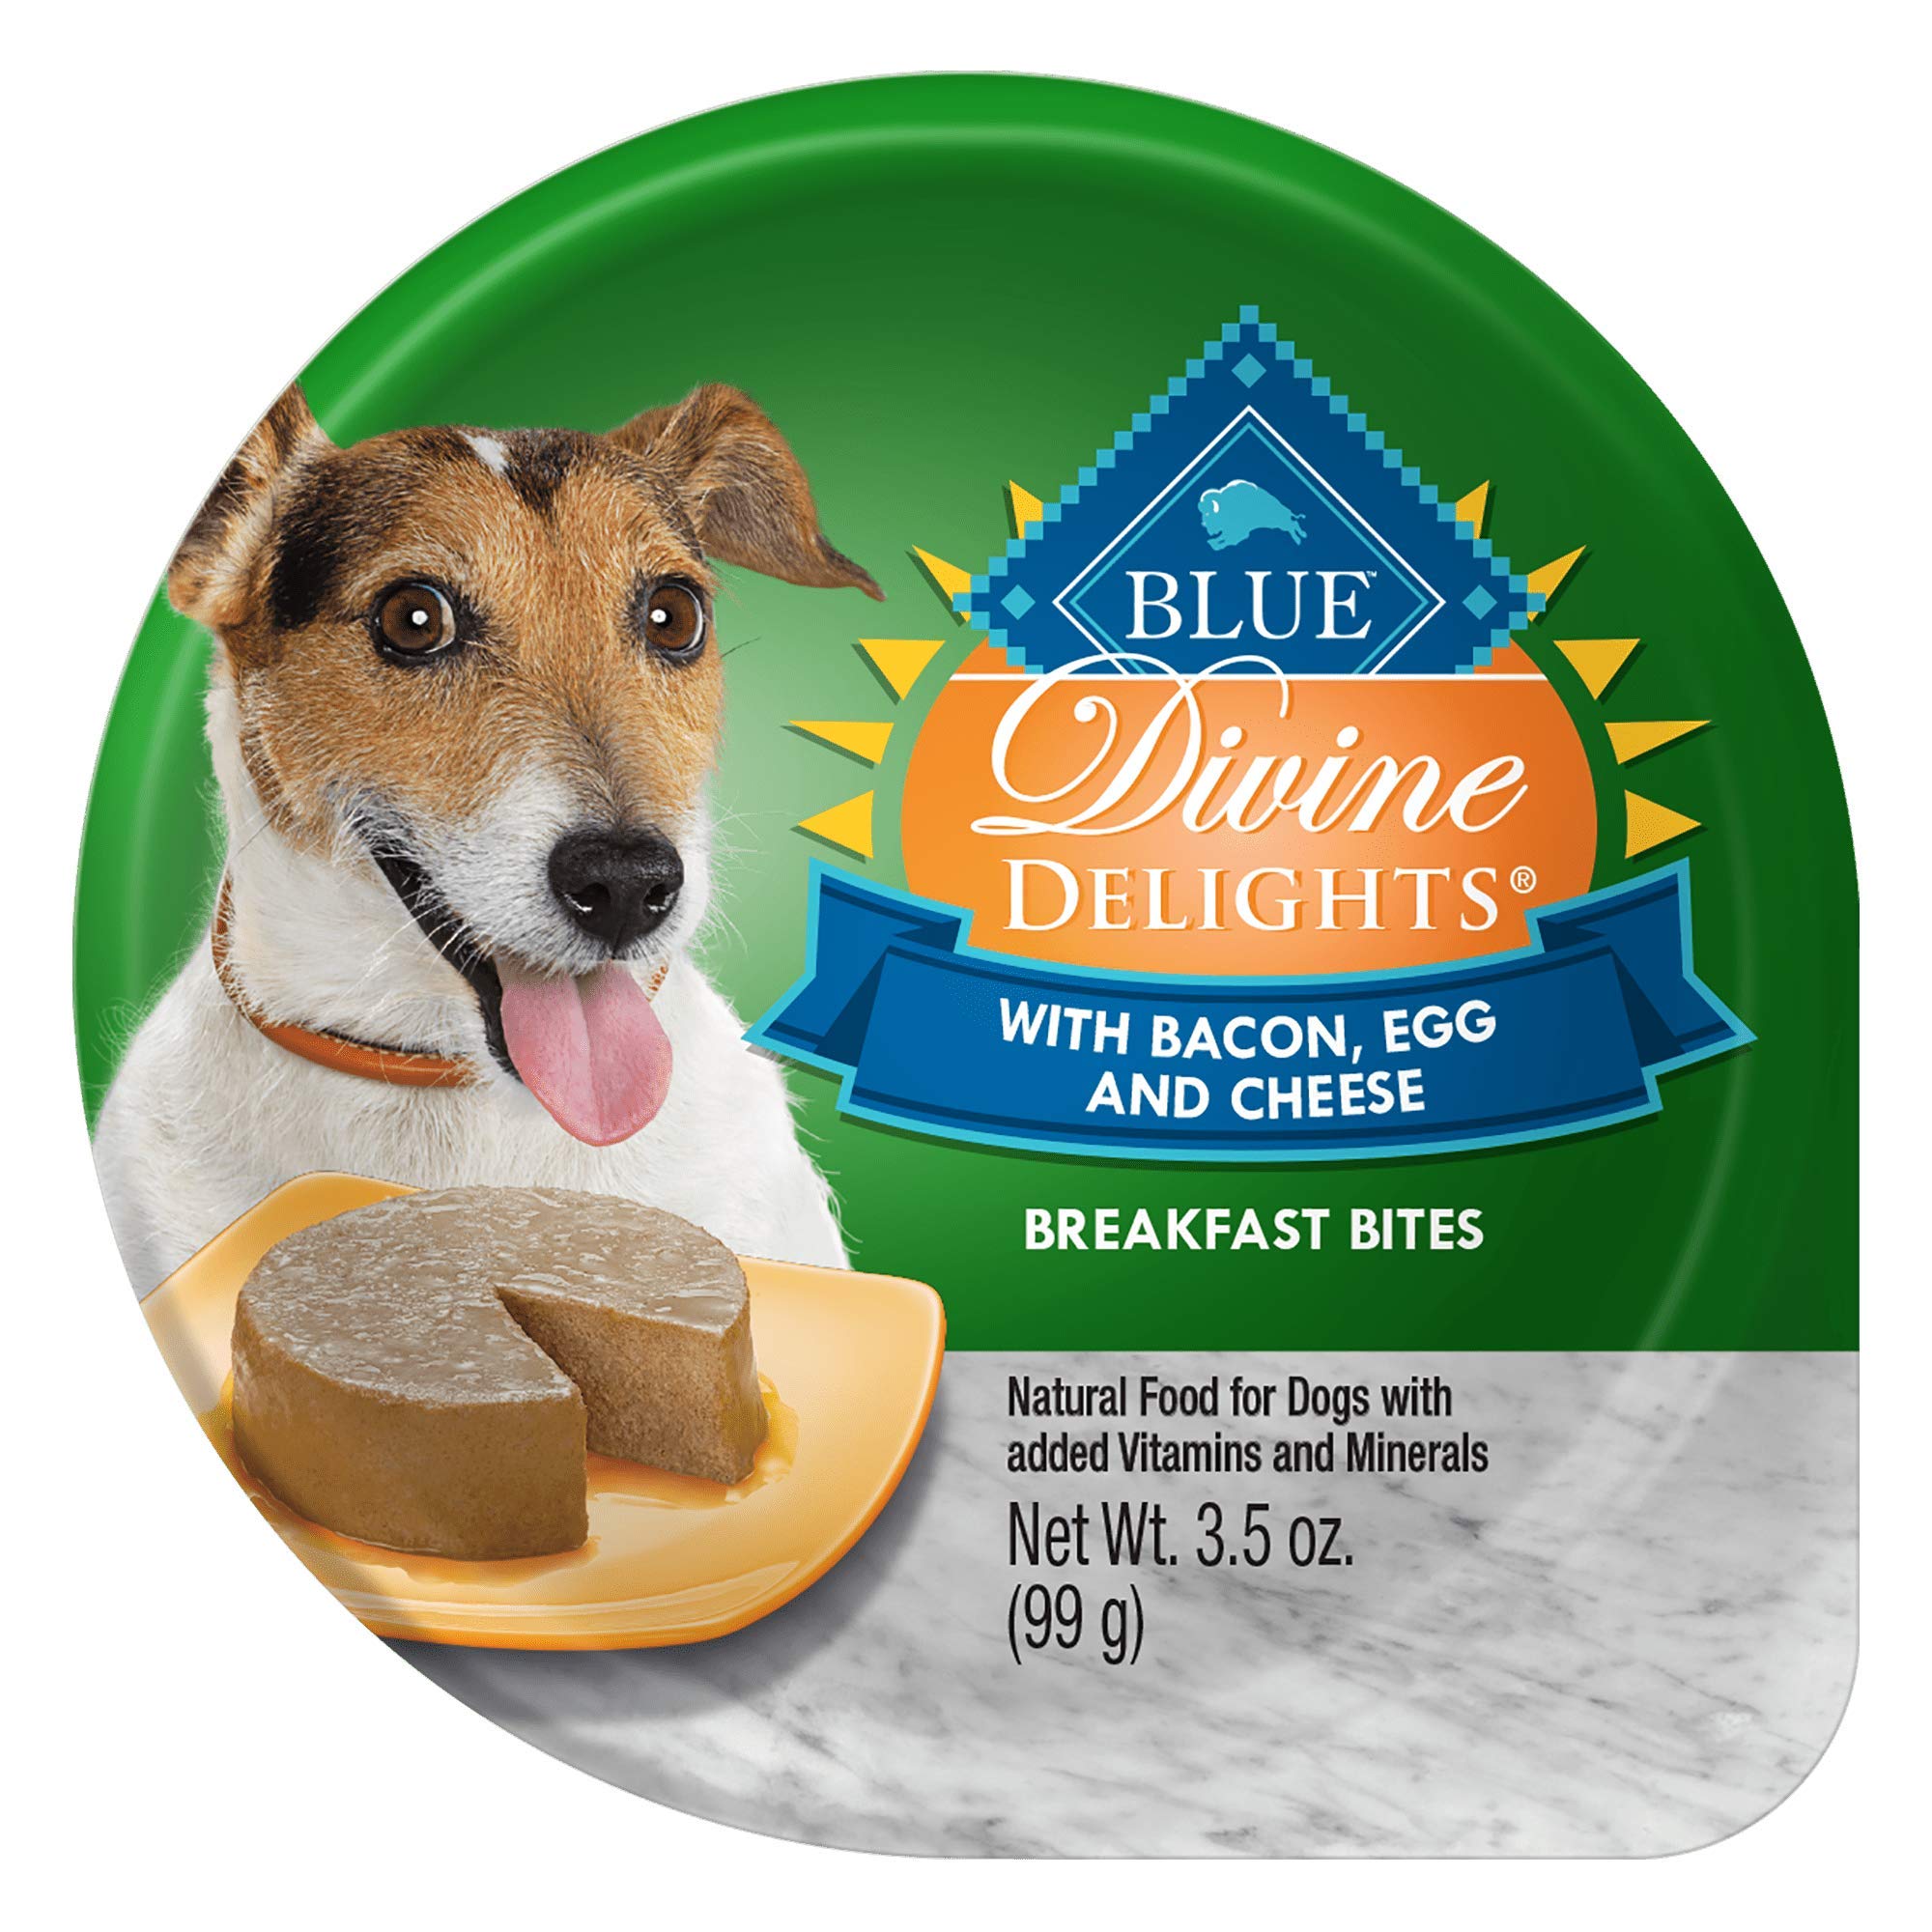 Blue Buffalo Devine Delights Bacon Egg and Cheese Wet Dog Food Trays - 3.5 Oz - Case of 12  